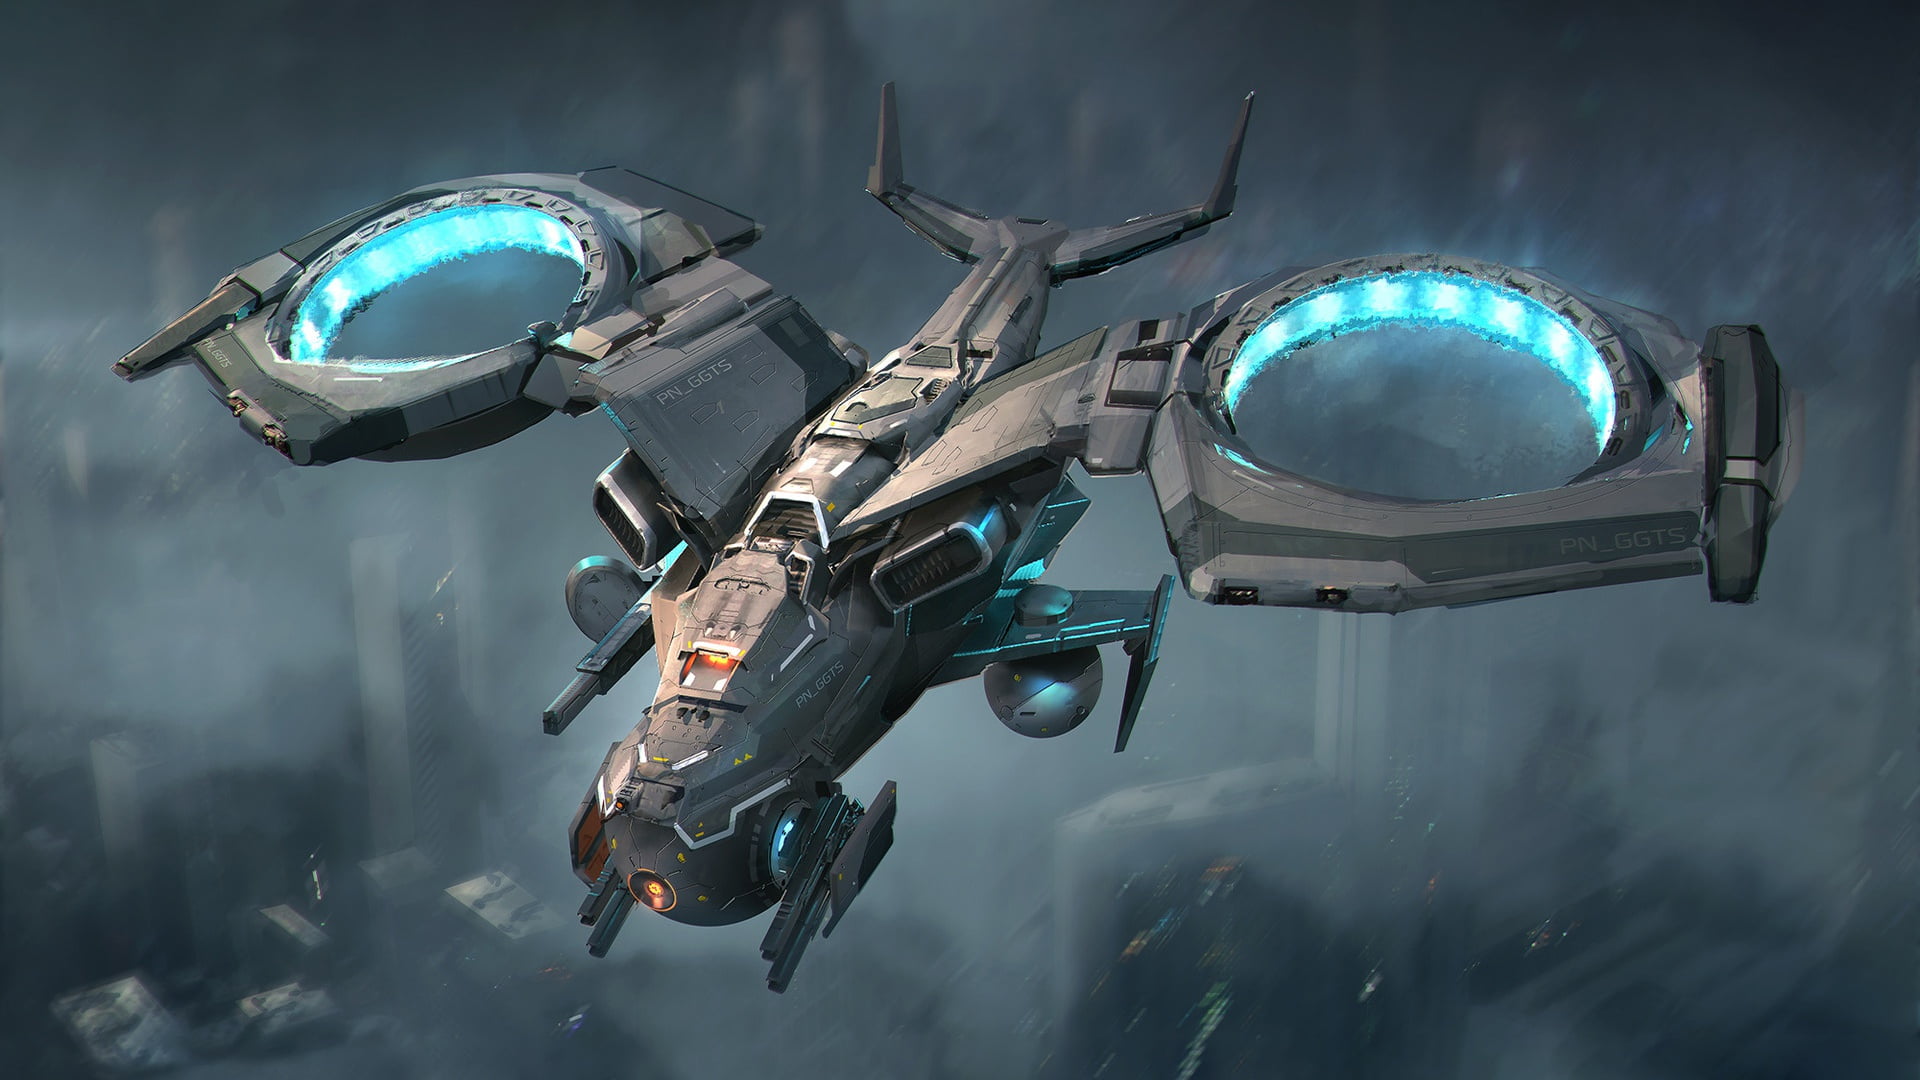 Future, Flight, Helicopter, Wings, Fiction, Concept Art, Transport